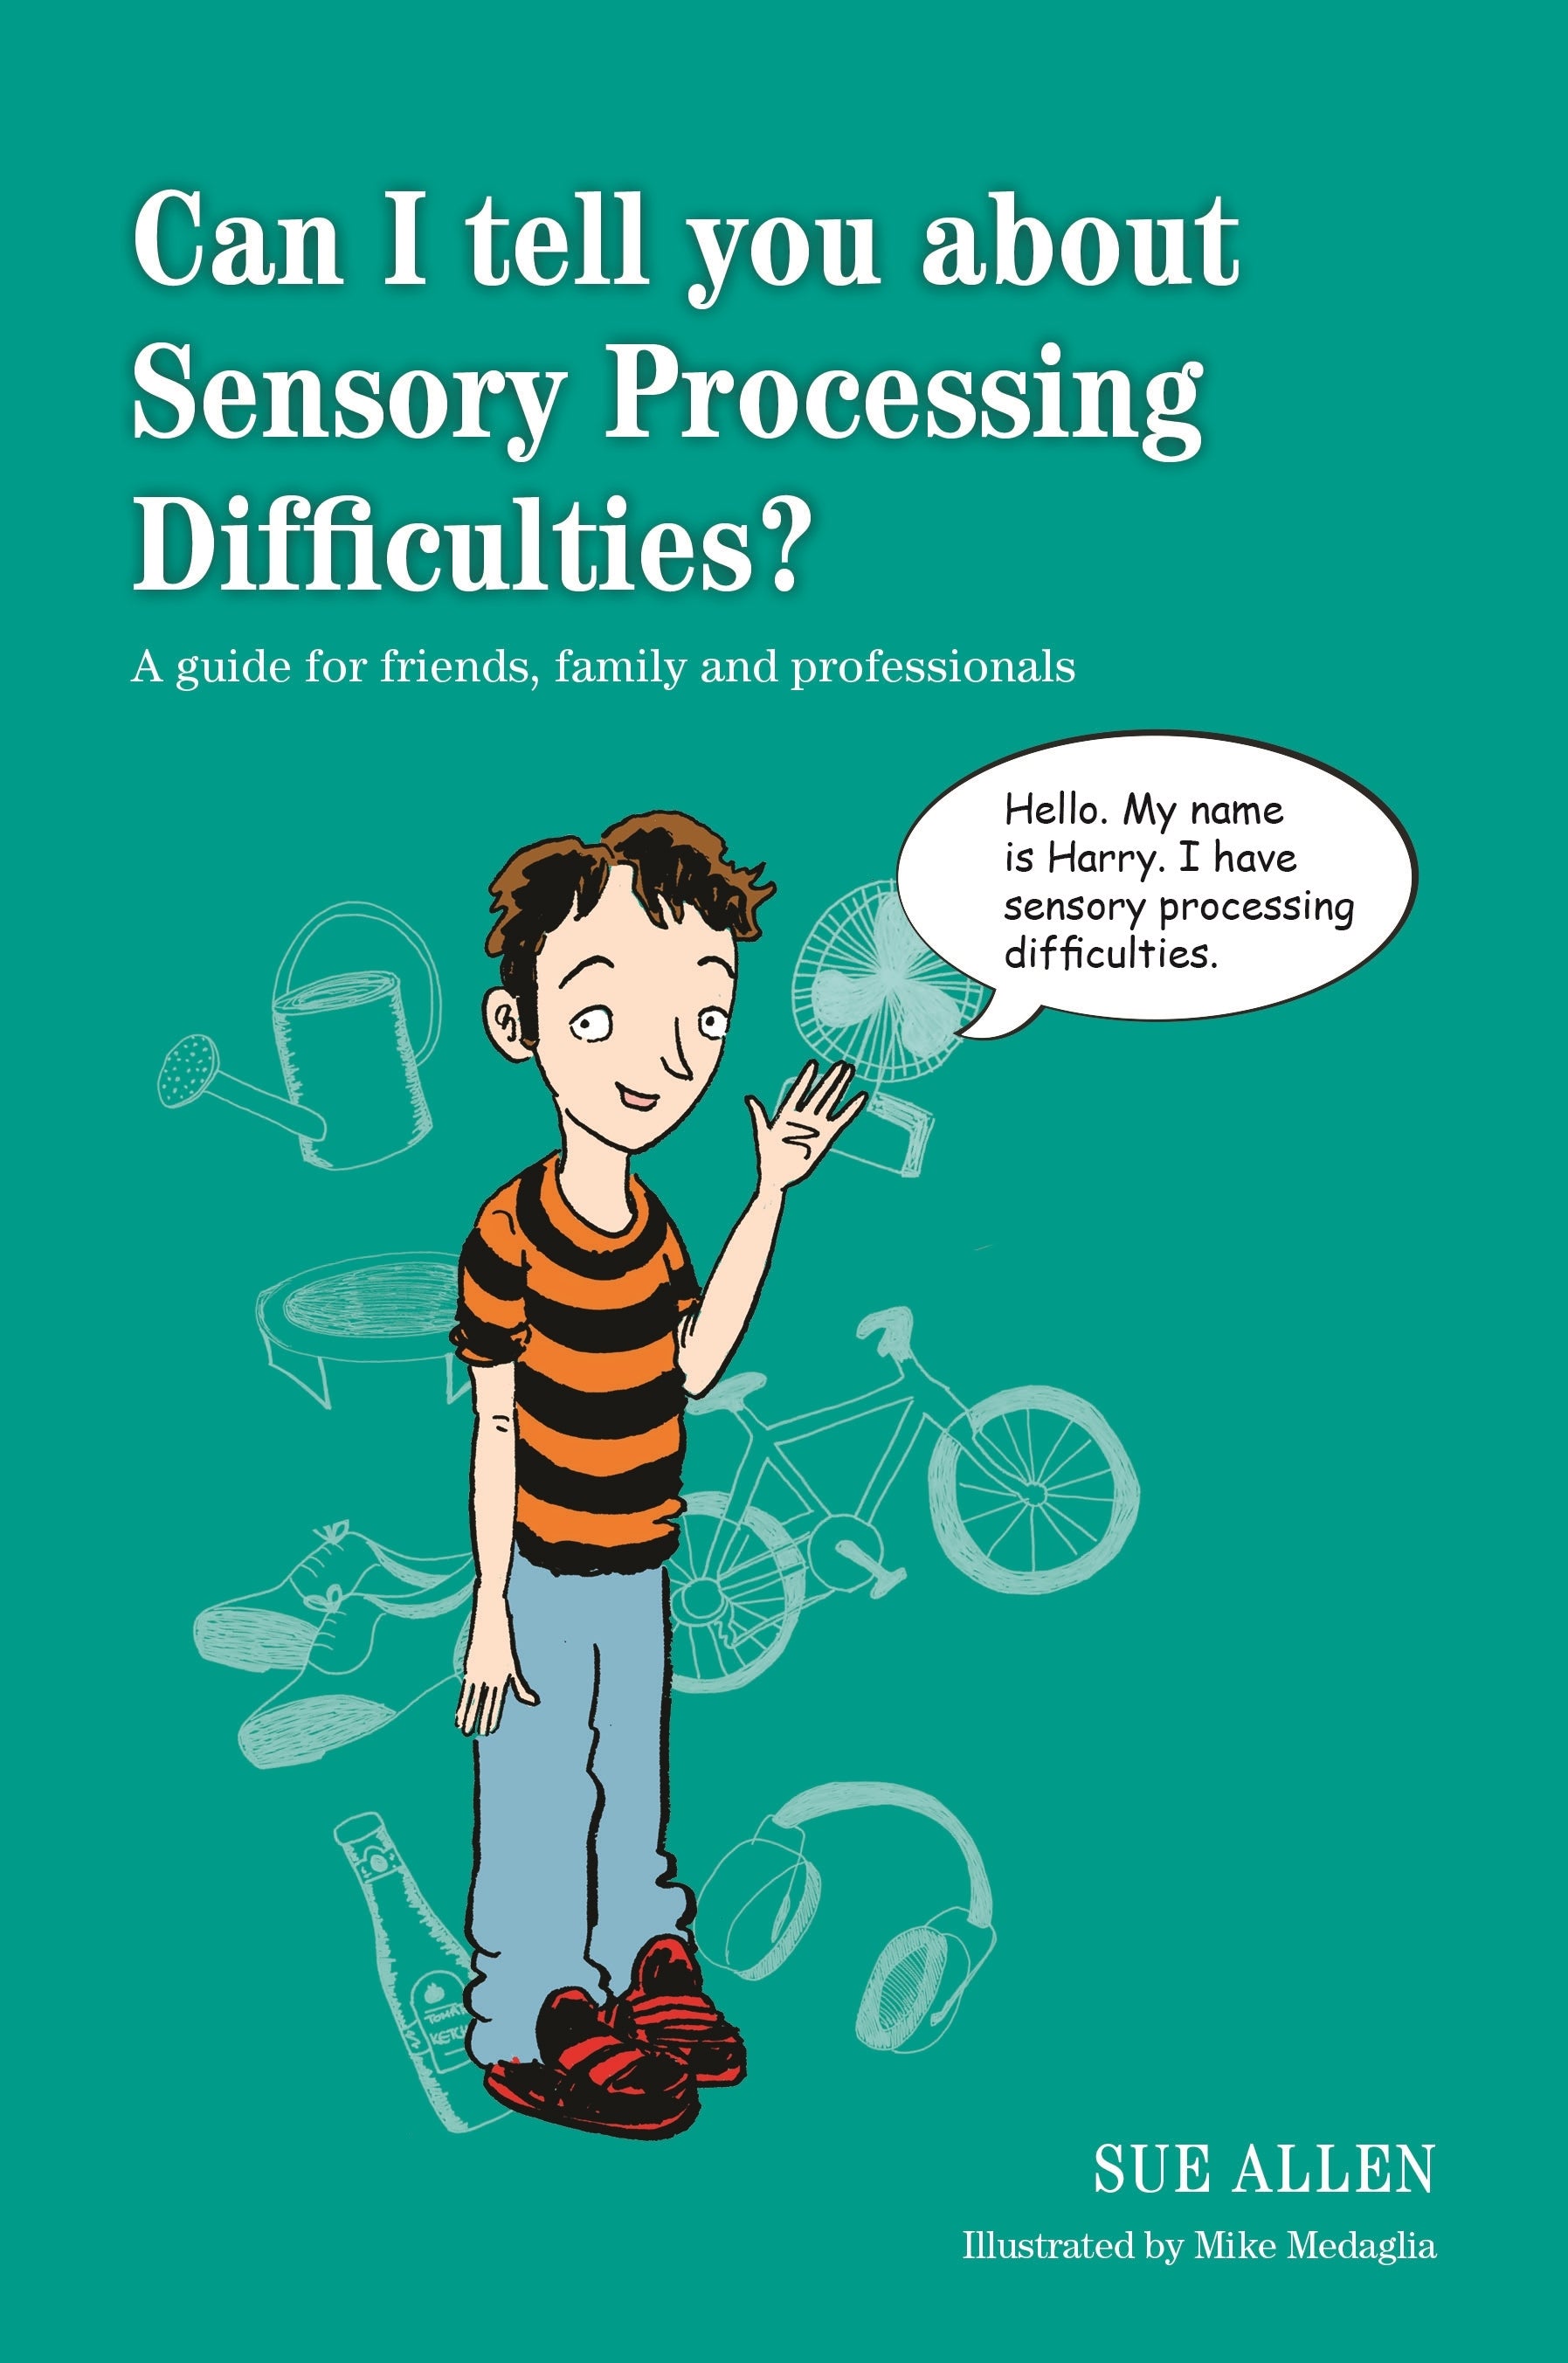 Can I tell you about Sensory Processing Difficulties? by Sue Allen, Mike Medaglia